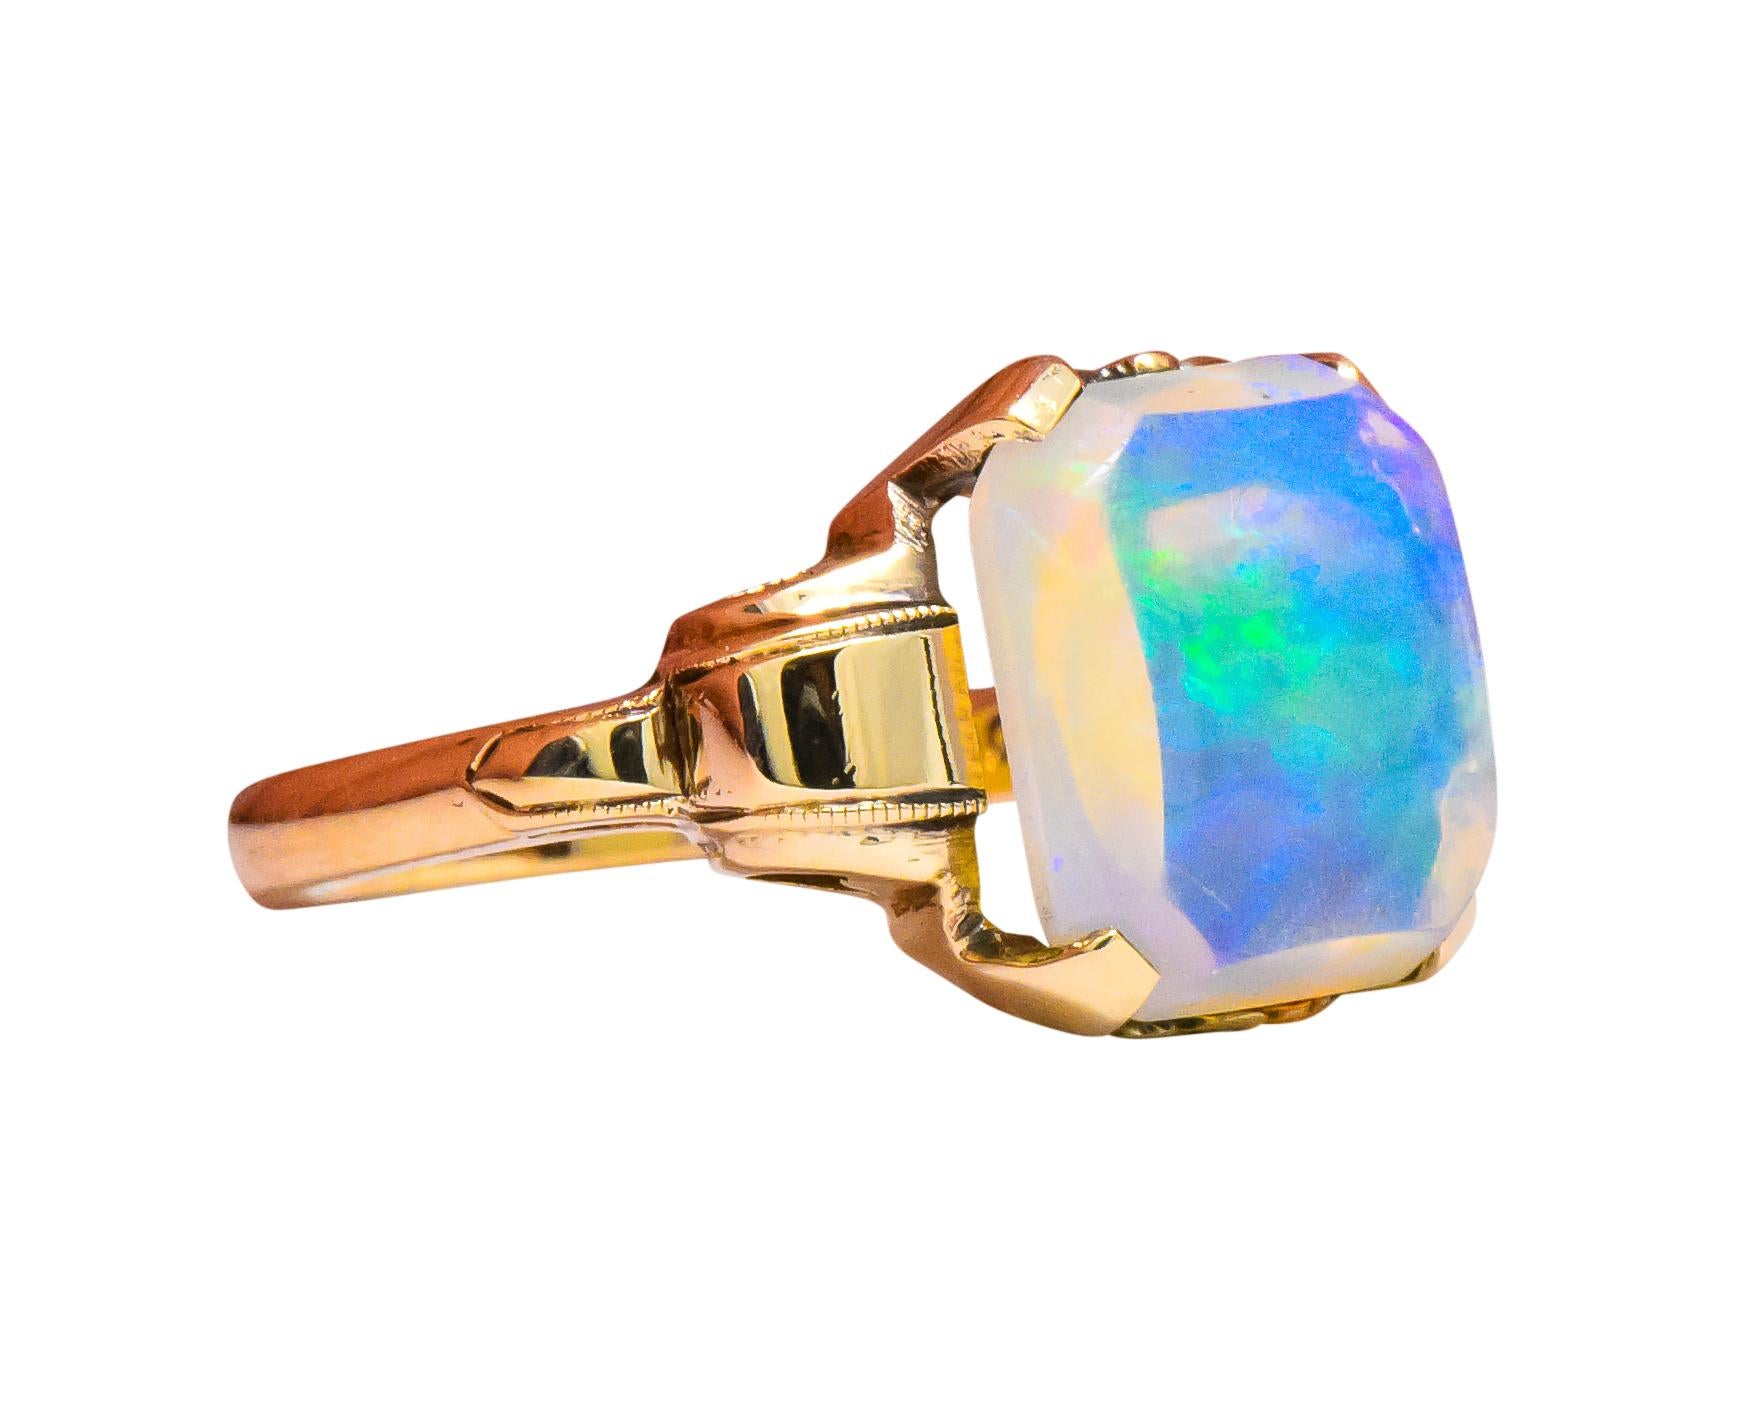 Centering a rectangular, cut-corner, buff top jelly opal

Translucent to transparent

Displaying very good play-of-color mostly in the green, violet and blue range 

Ring stamped R & S and 10K

Ring Size: 6 1/2 & Sizable

Top measures 12.2 mm and